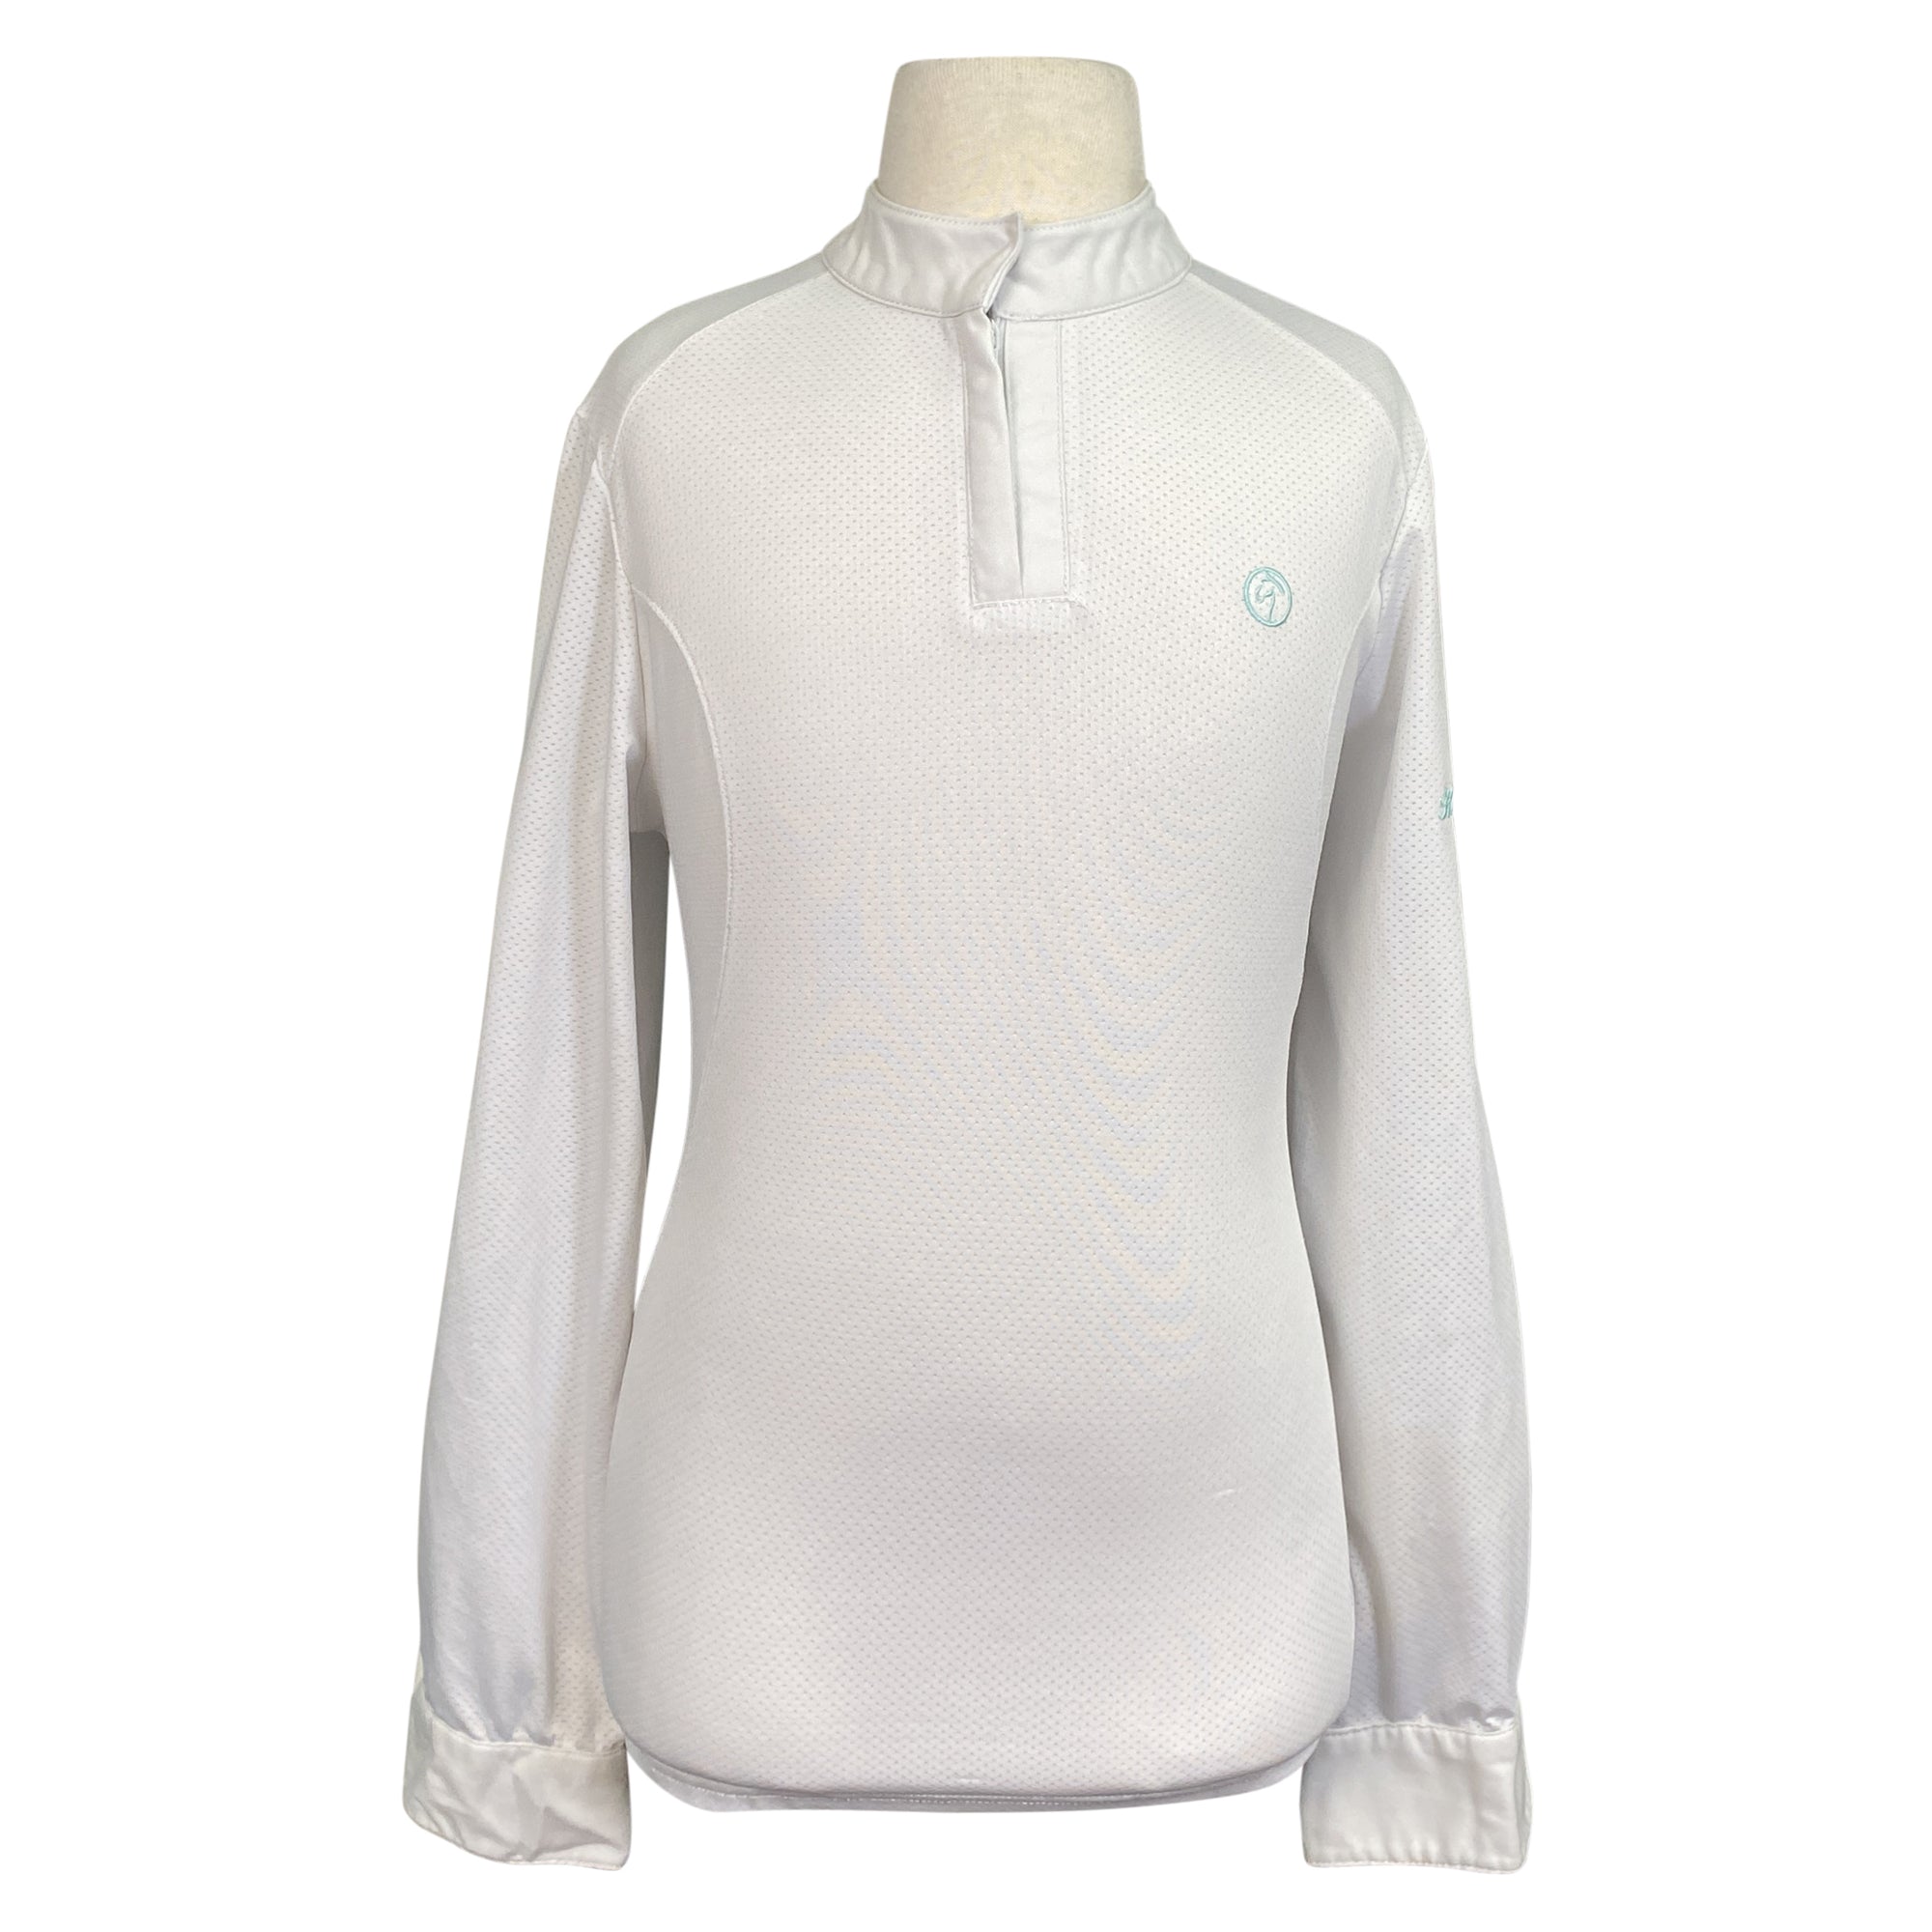 Kathryn Lily Competition Shirt in White